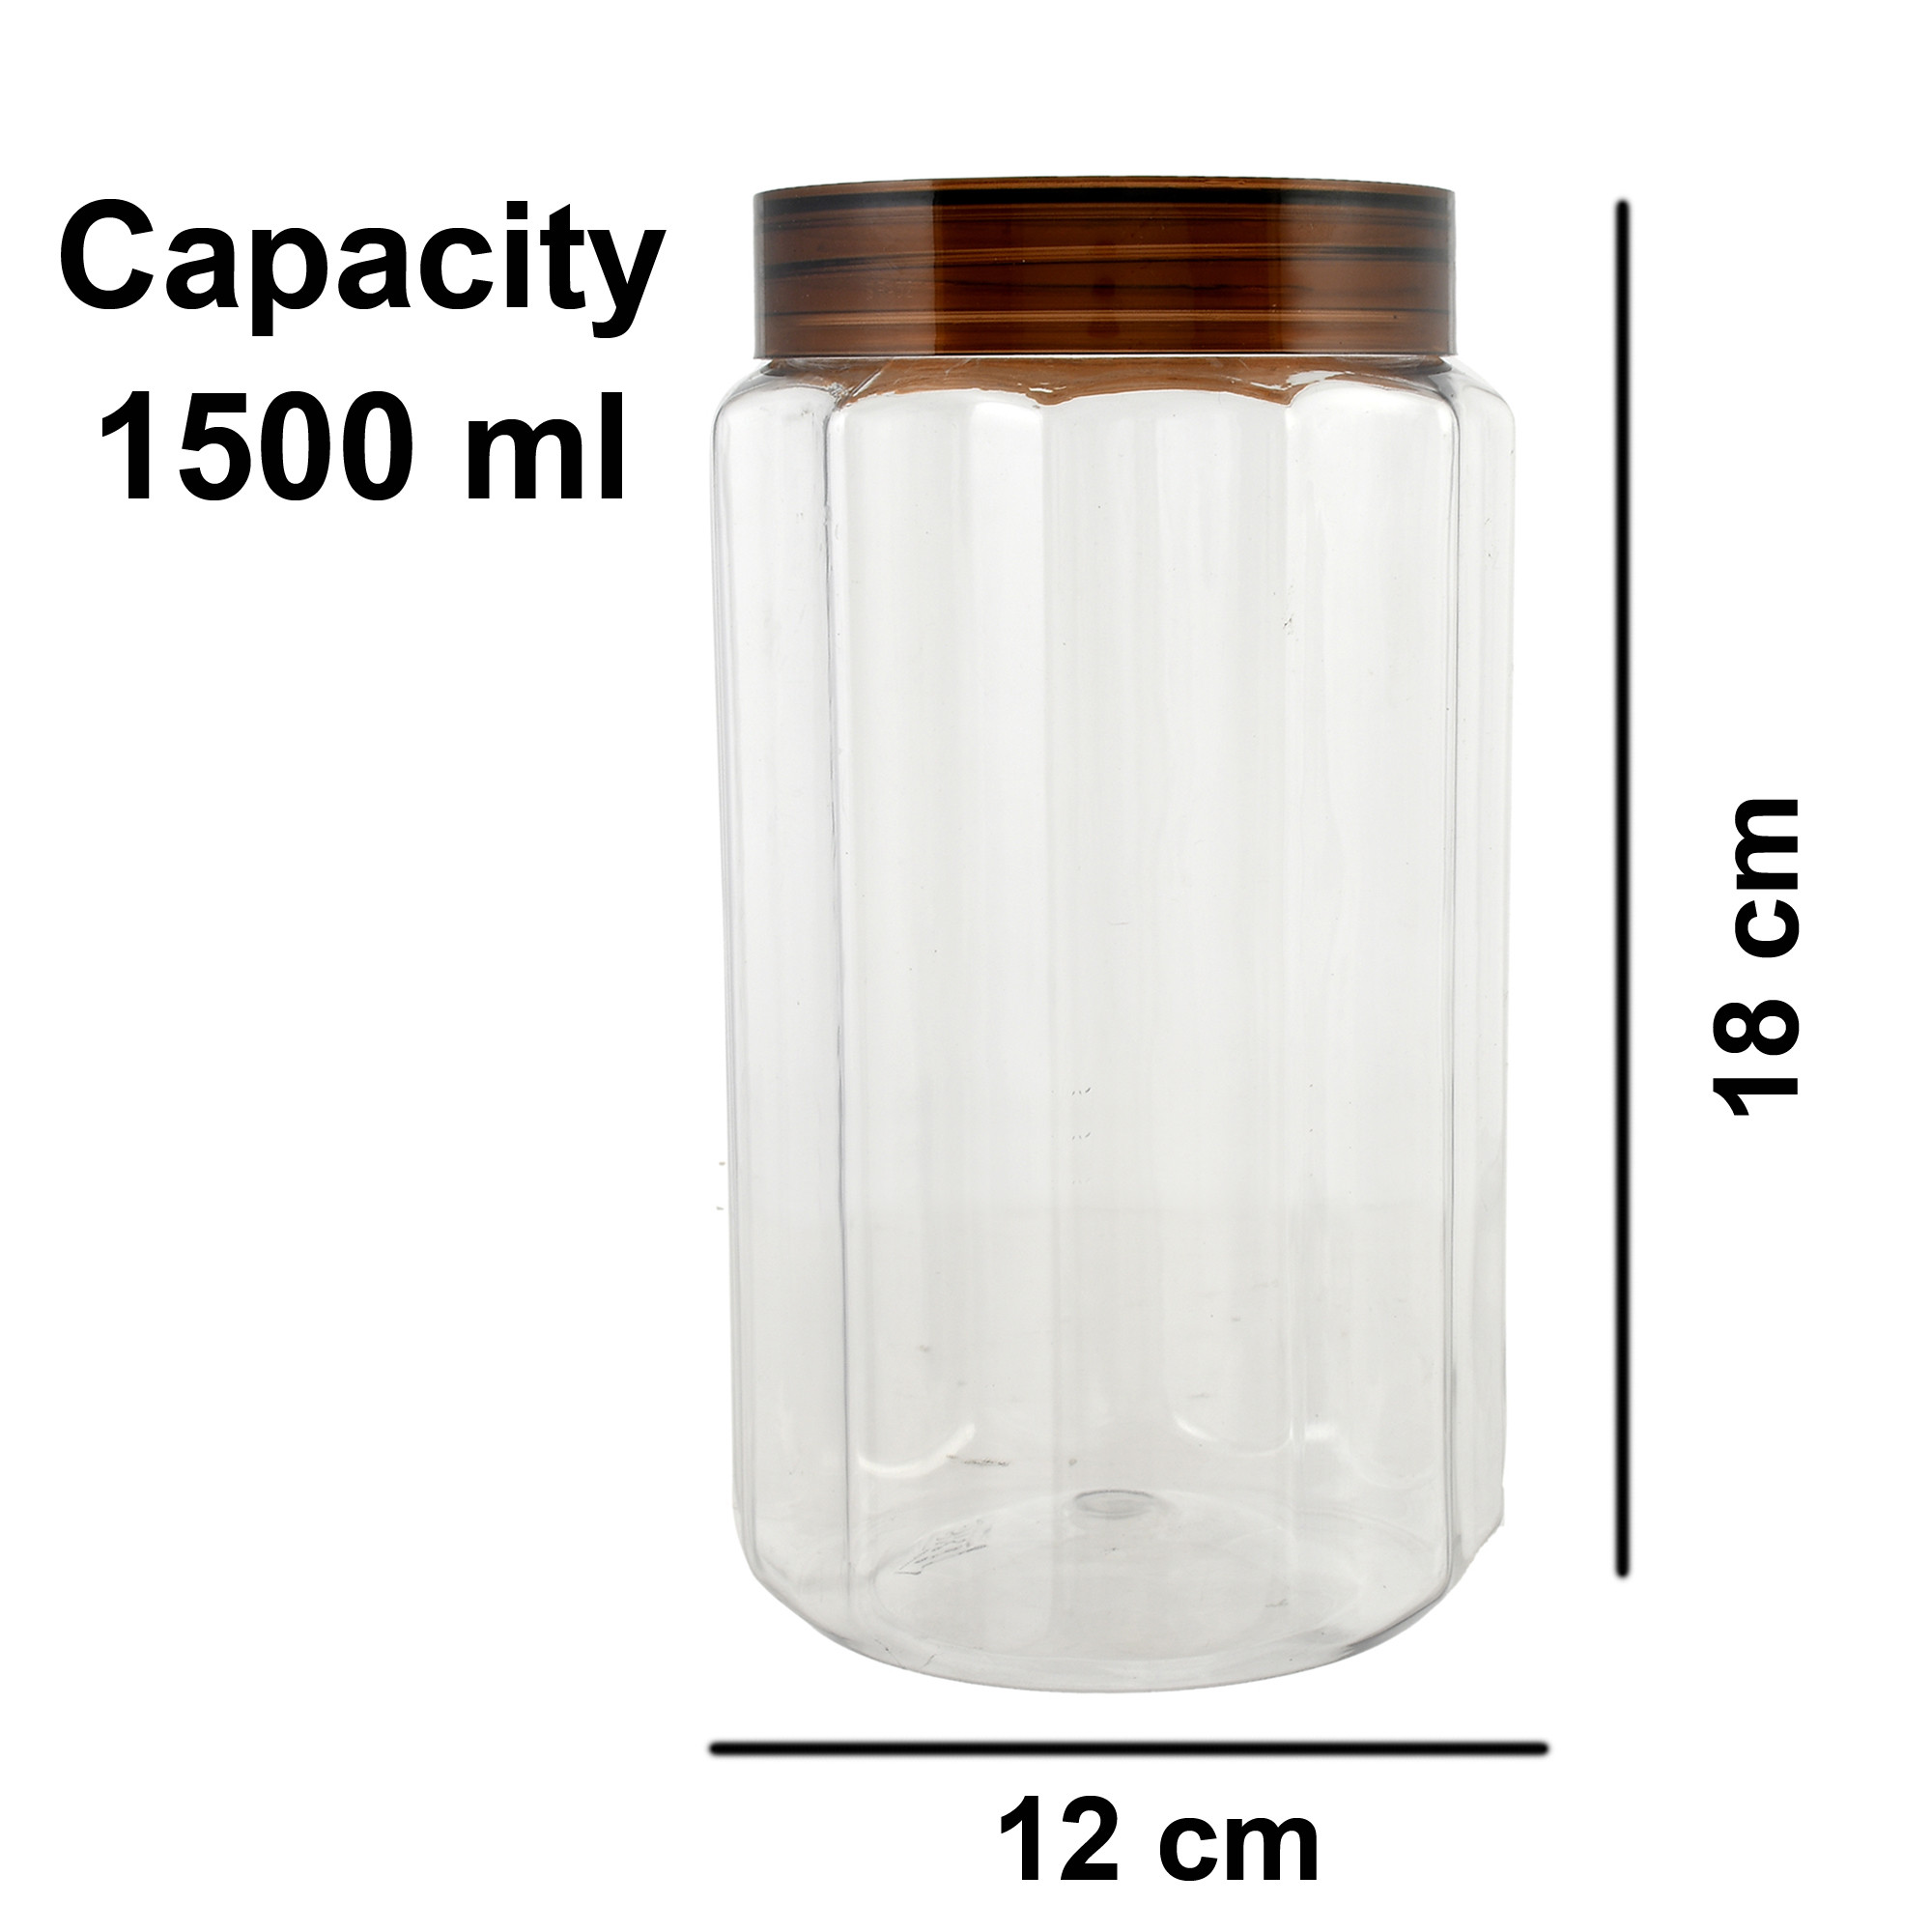 Kuber Industries Opal Airtight Food Storage Containers Kitchen Containers for Storage Set Plastic Storage Box for Kitchen Airtight Containers Storage Jar Set for Kitchen Storage (1500 ml, Brown)